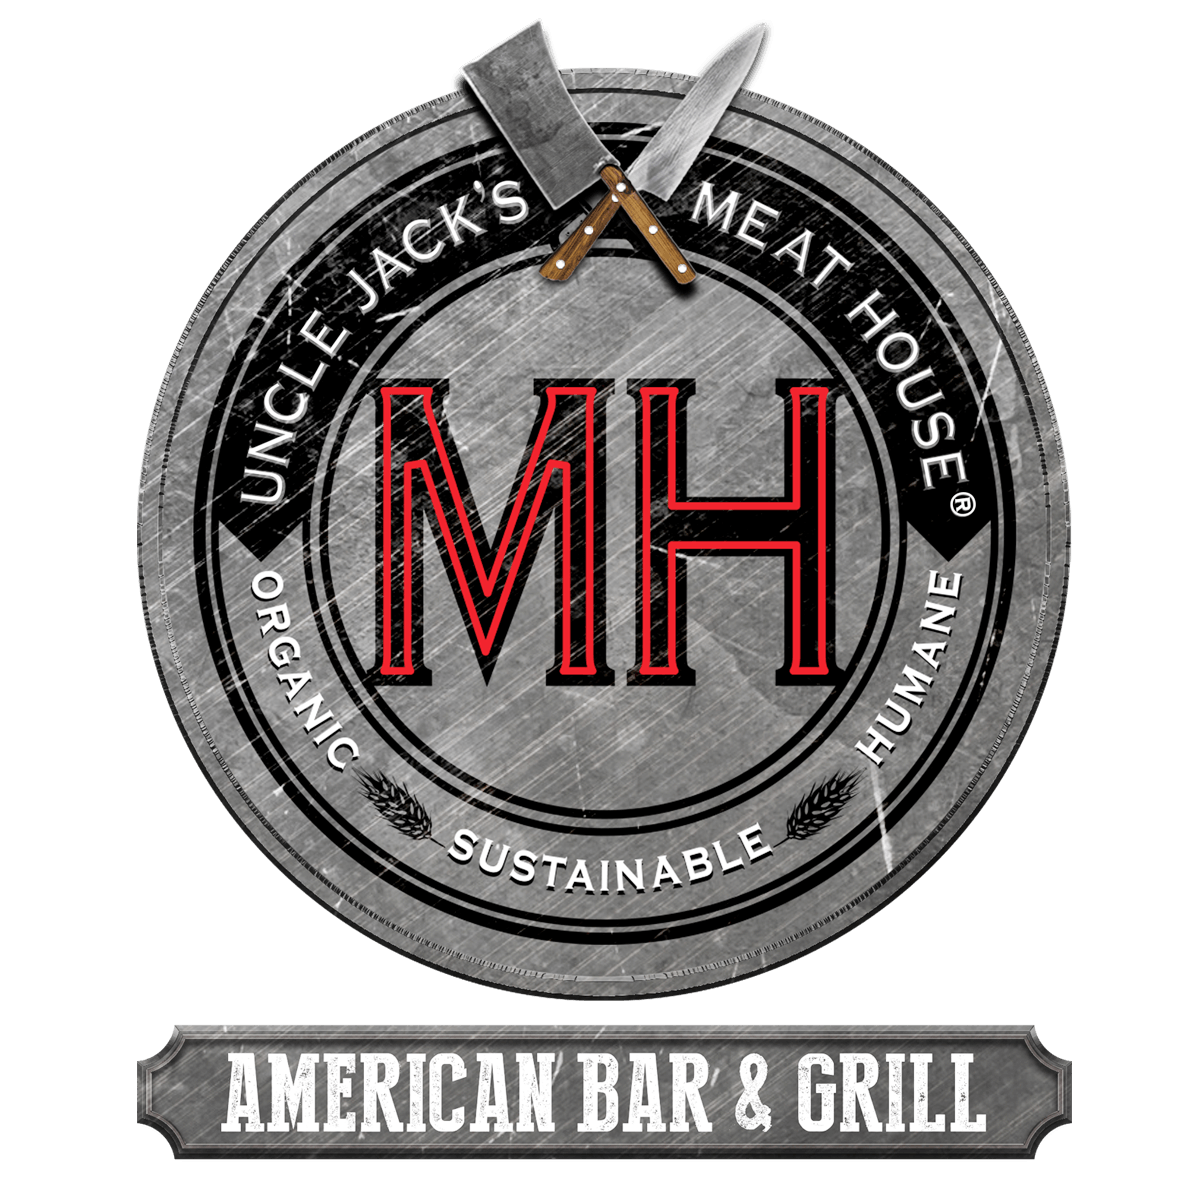 the logo for uncle jack 's meat house american bar and grill